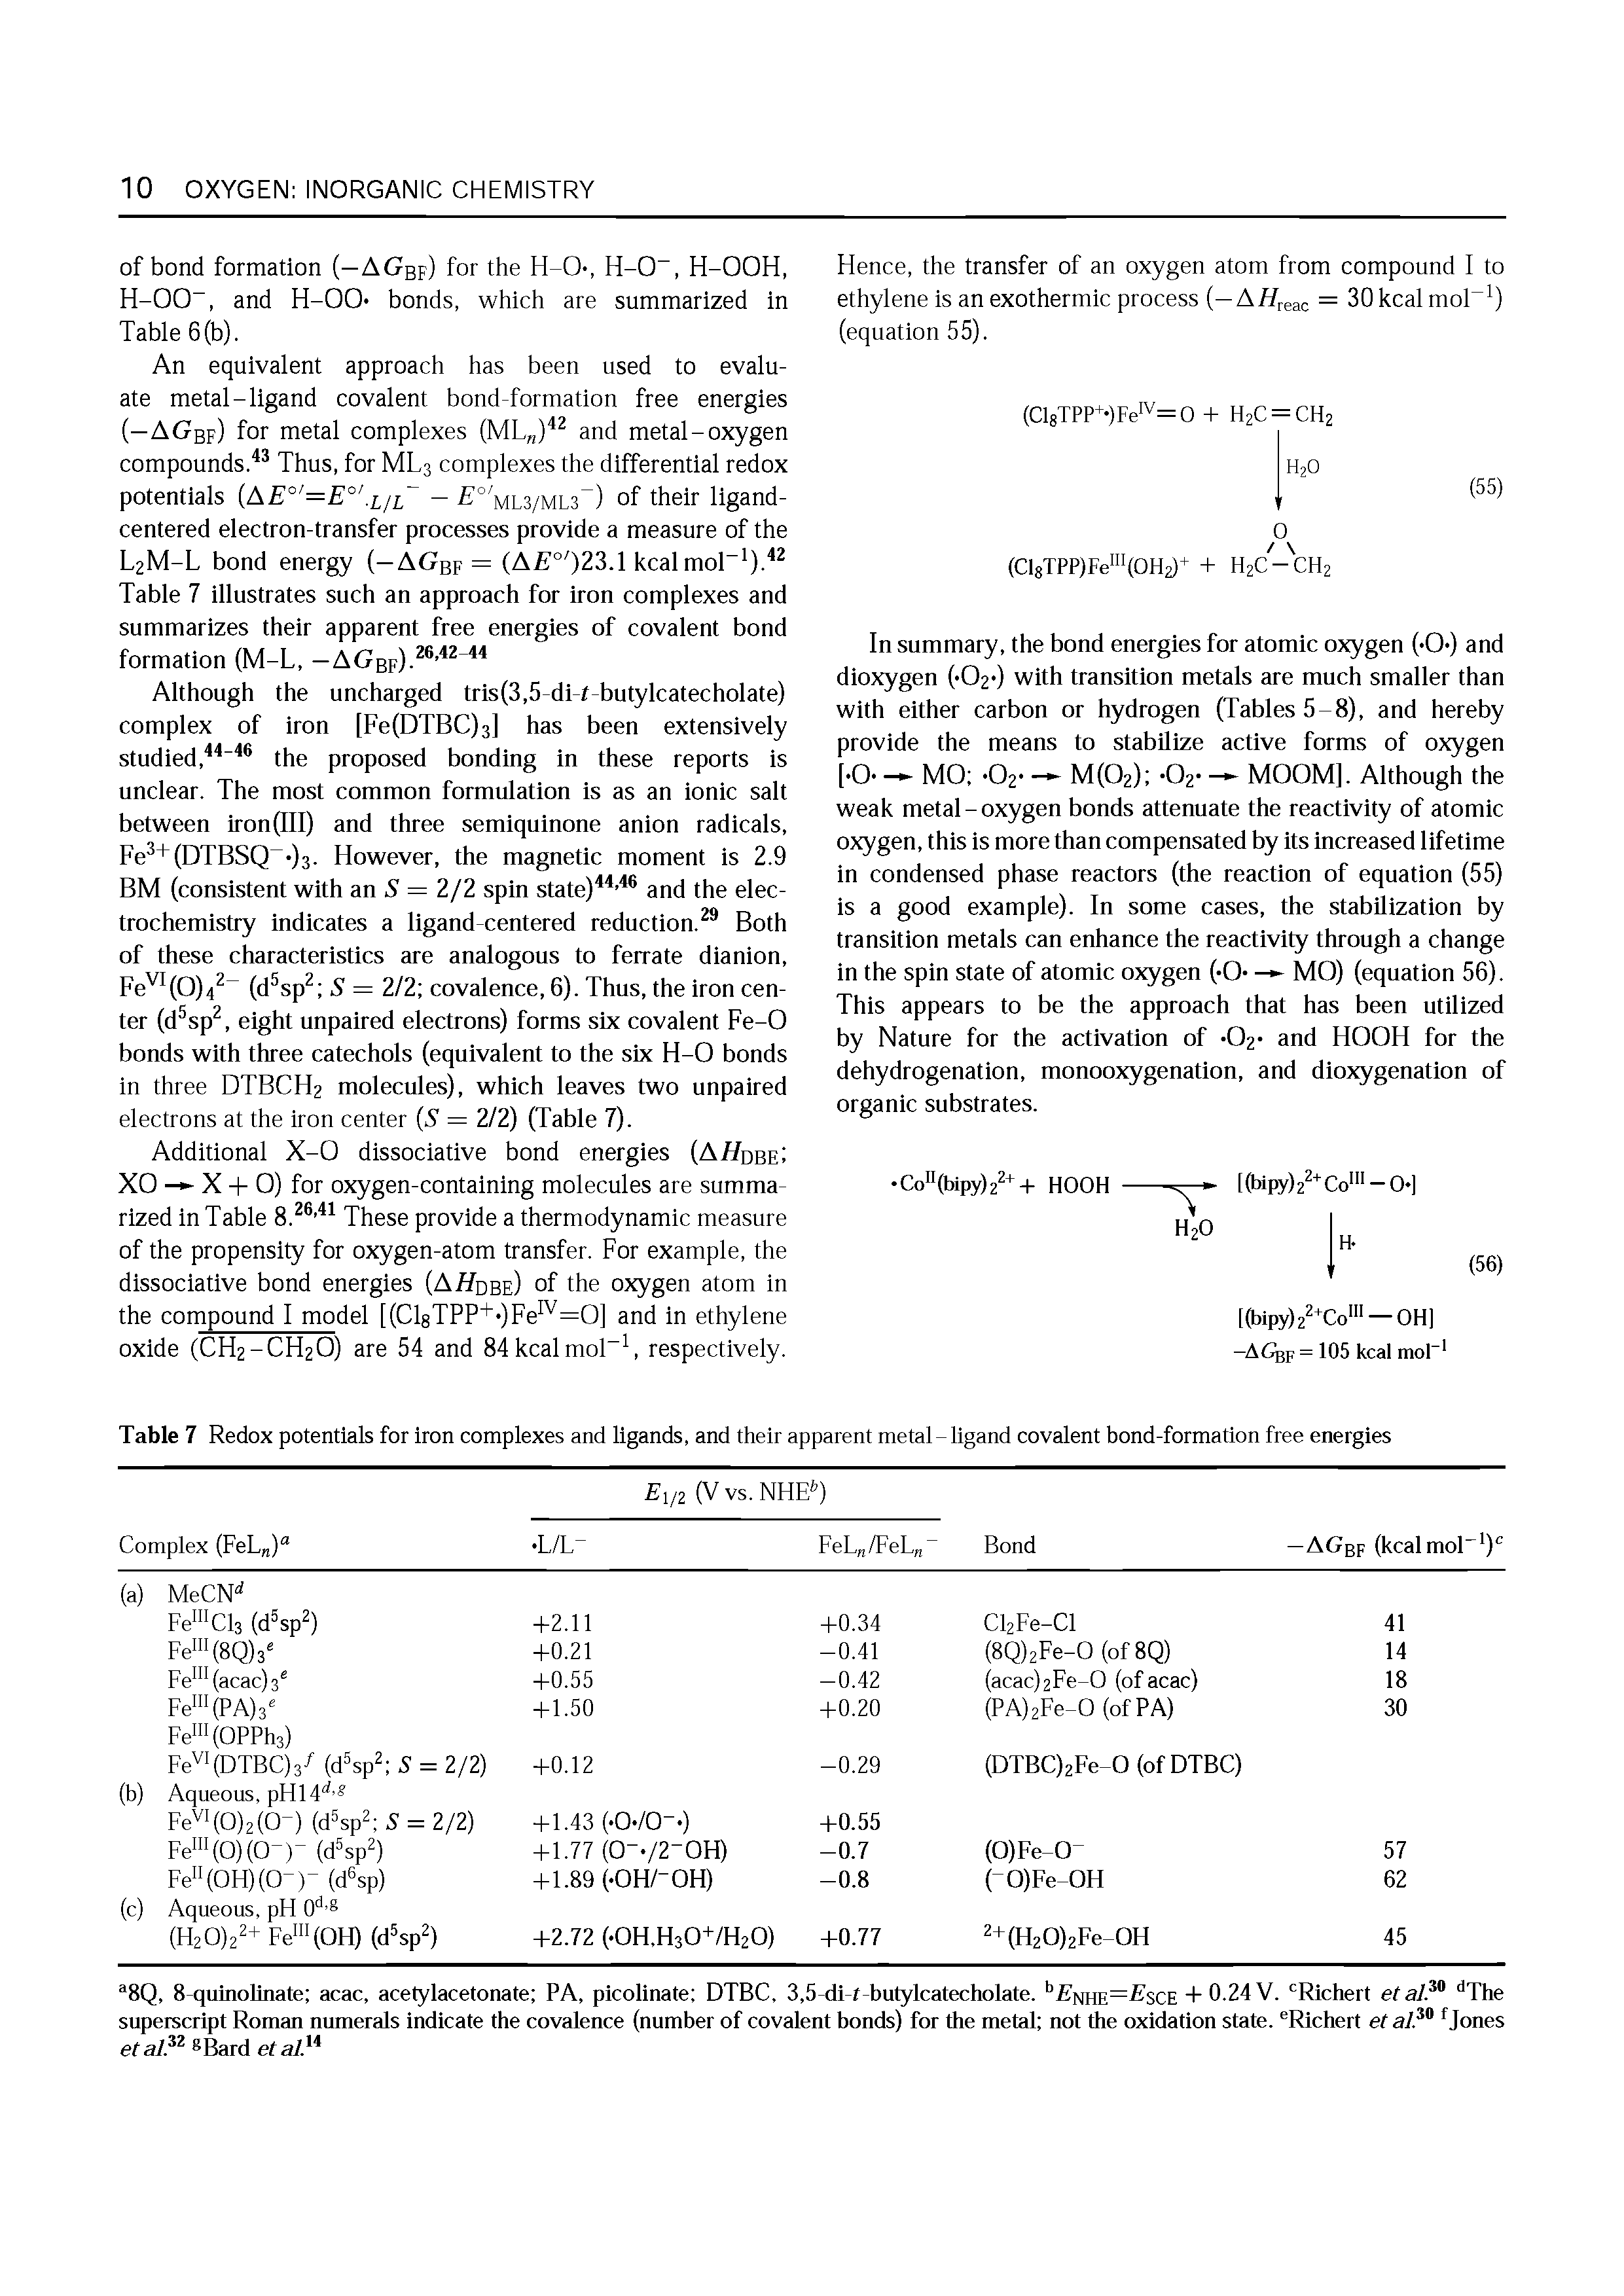 Table 7 Redox potentiais for iron compiexes and iigands, and their apparent metai-iigand covaient bond-formation free energies...